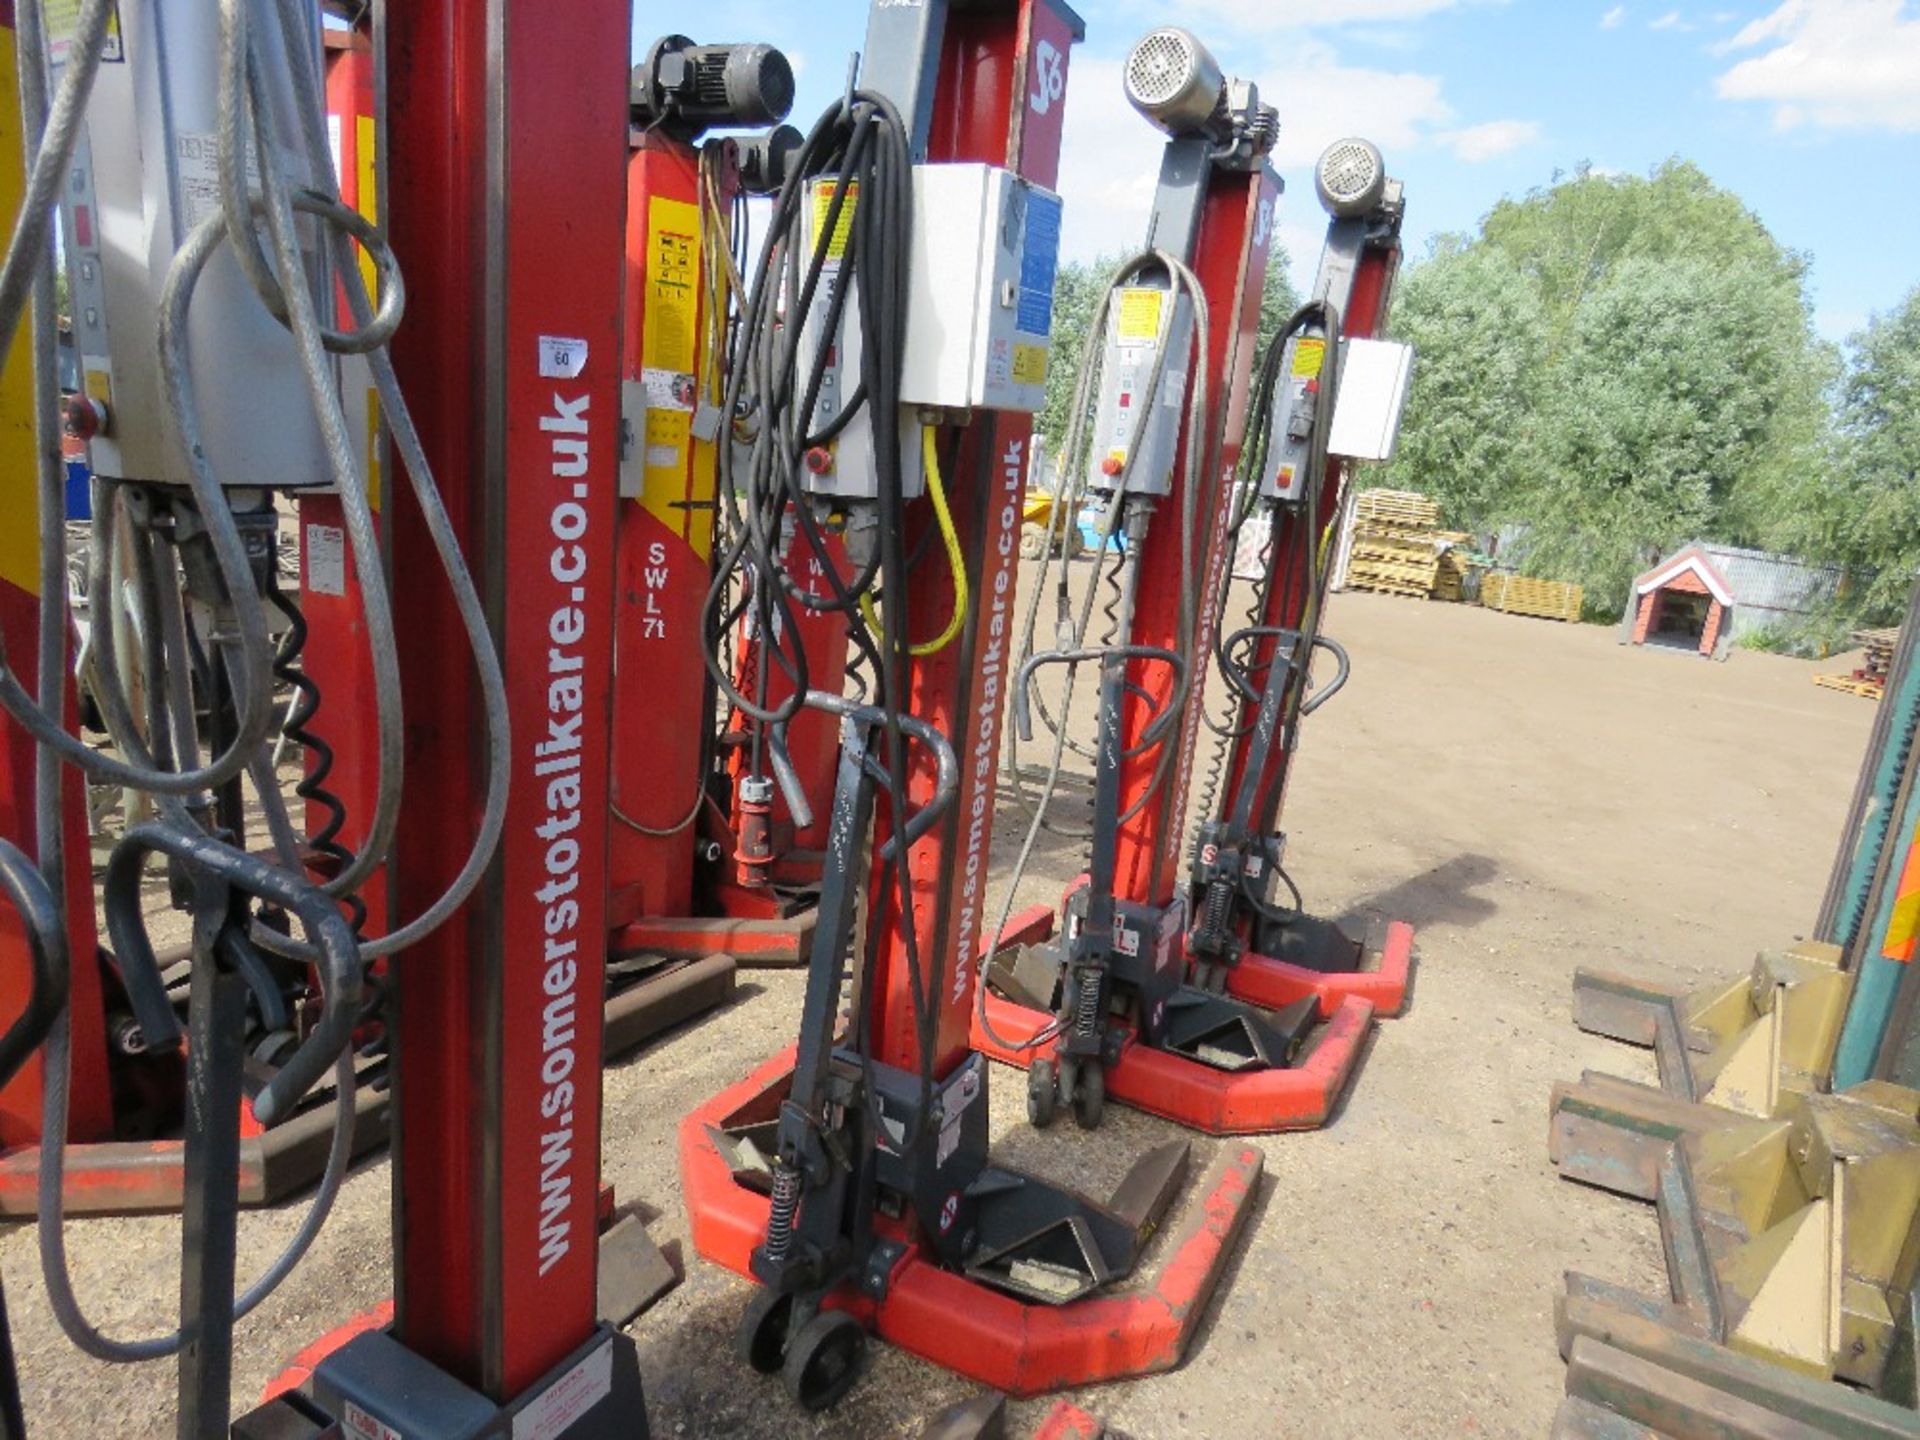 SET OF 4 X SOMERS S6 PORTABLE COLUMN LIFT UNITS FOR COMMERCIAL VEHICLES, 7.5 TONNE RATED CAPACITY, Y